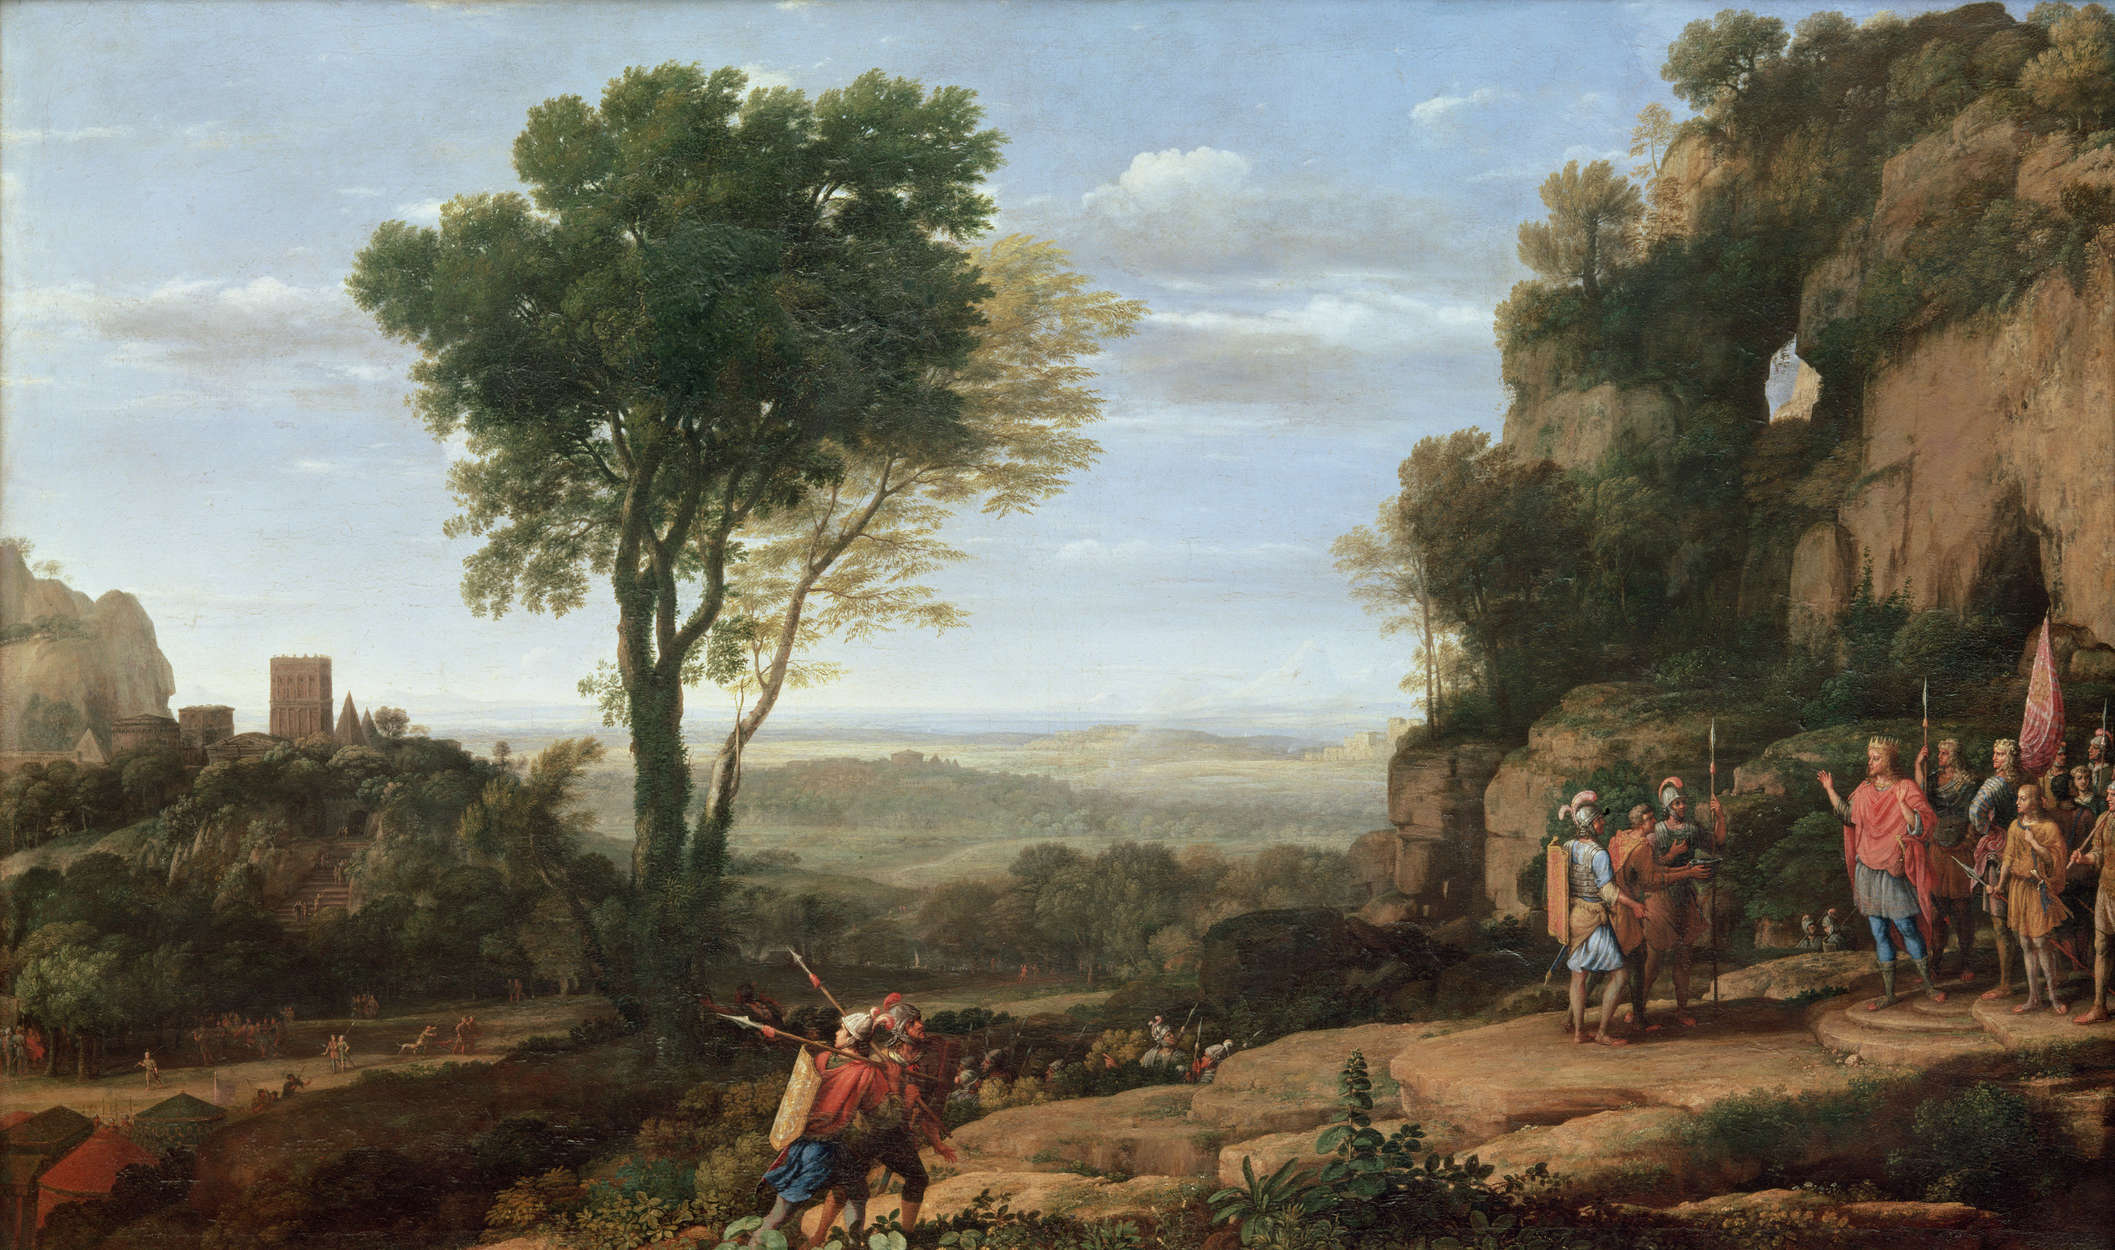             Photo wallpaper "Landscape with in the cave Abdullam " by Claude Lorrain
        